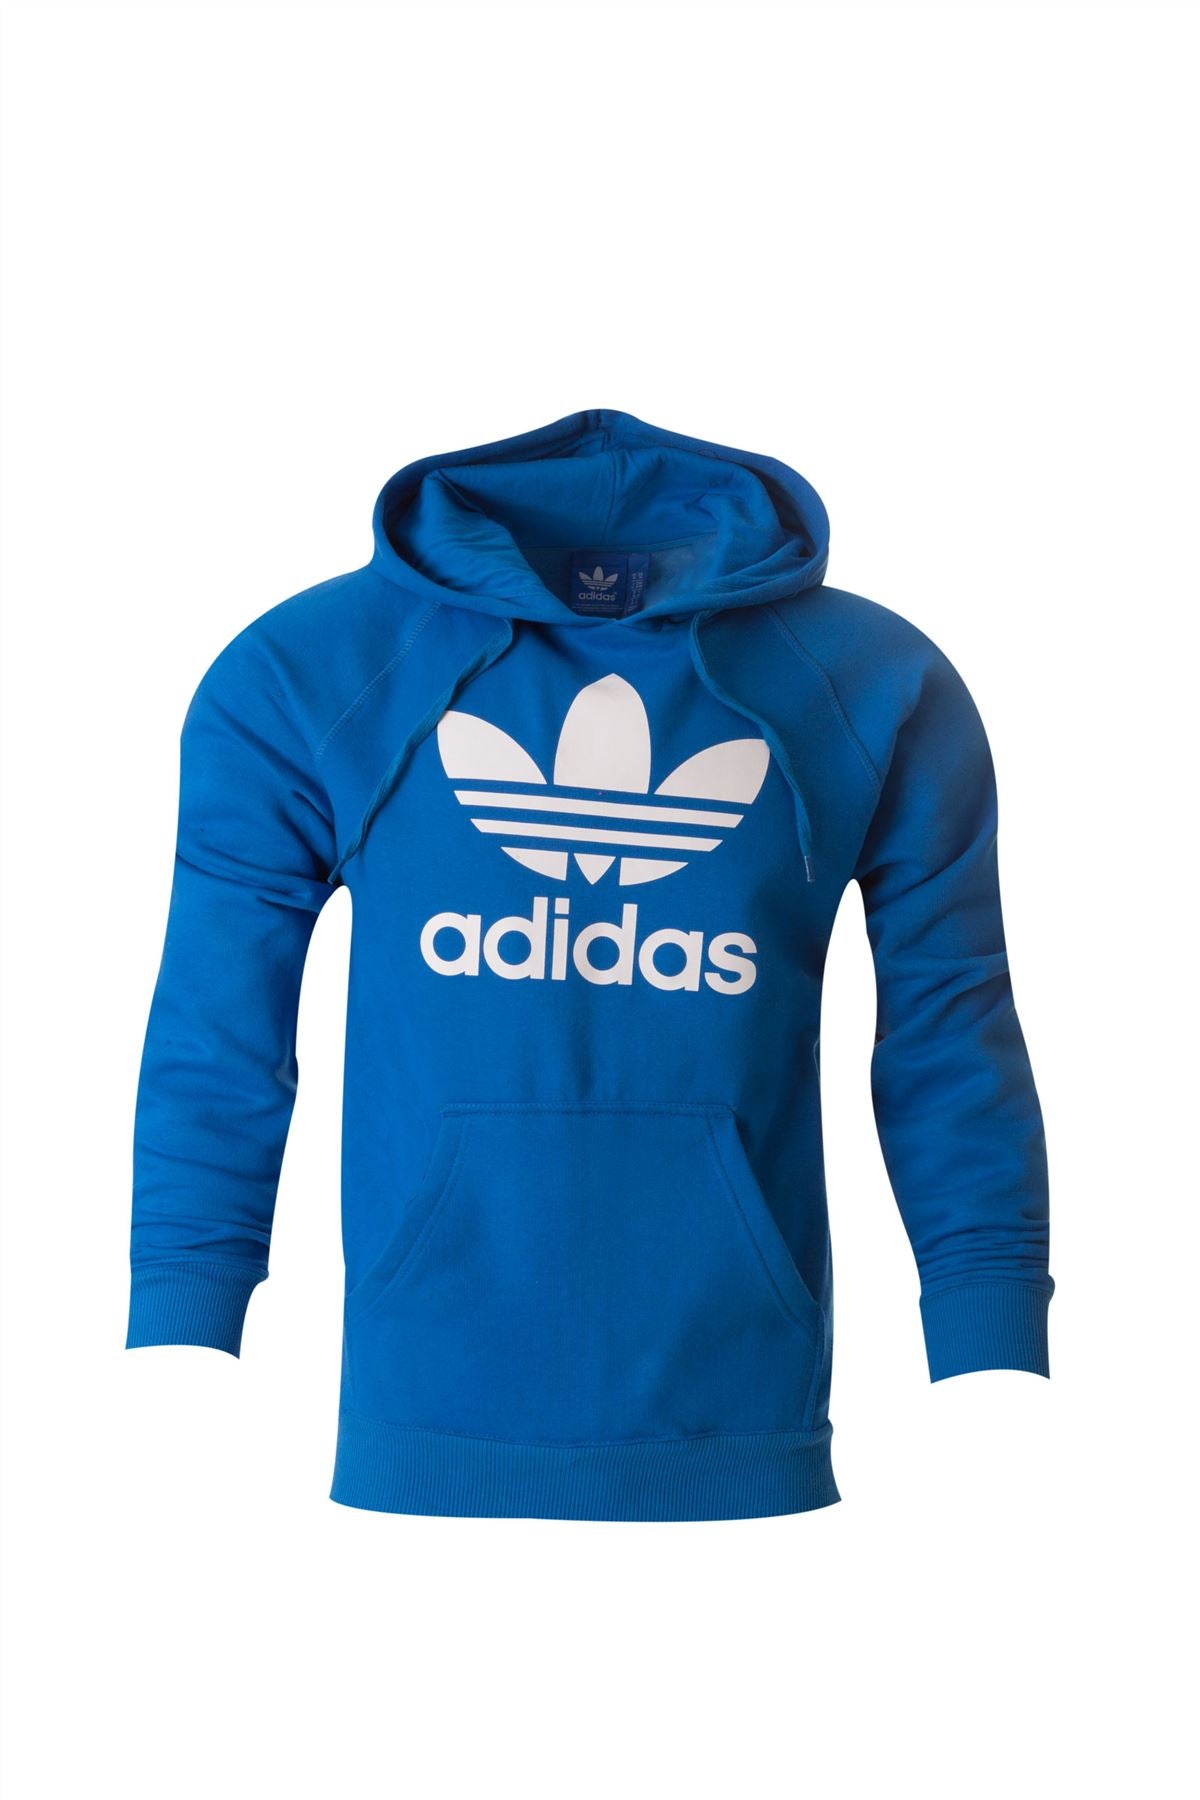 Adidas Originals Trefoil Cotton Casual Hoodie Hooded Shirt All Size S M L XL Blue